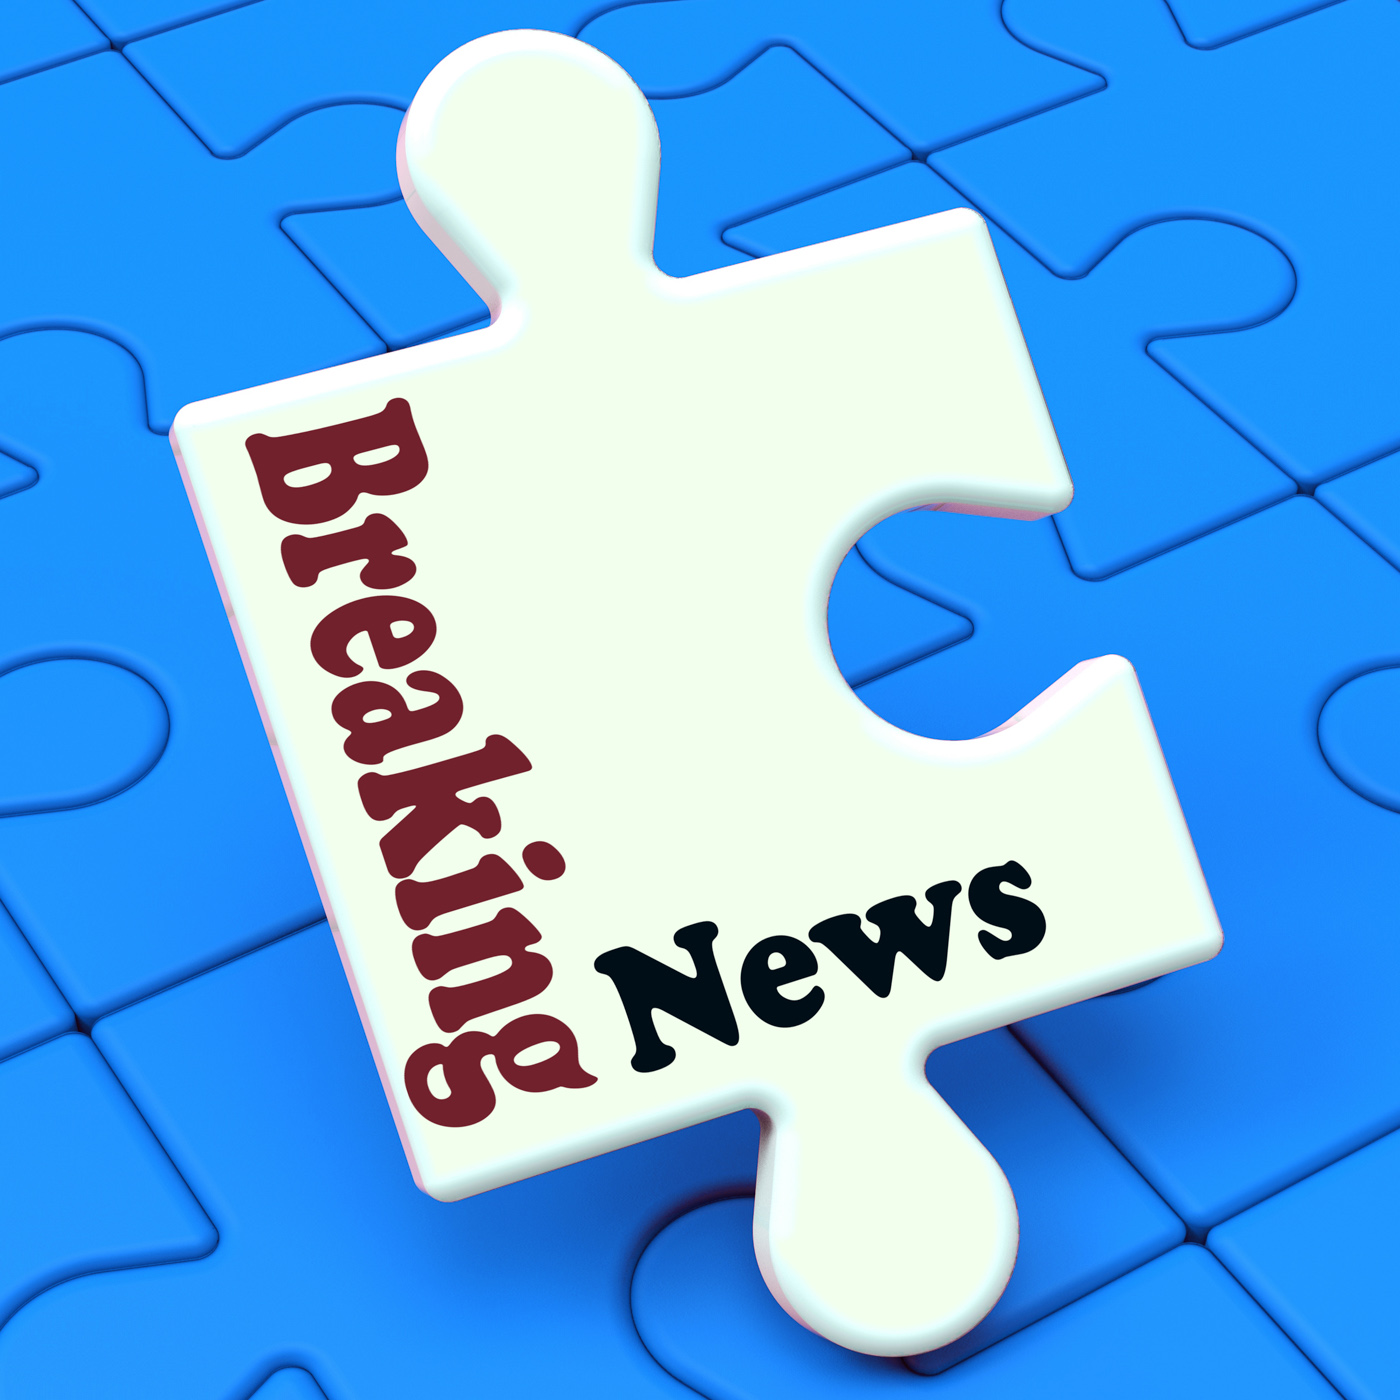 Breaking News Puzzle Shows Newsflash Broadcast Or Newscast, Announcement, Newscast, Report, Press, HQ Photo